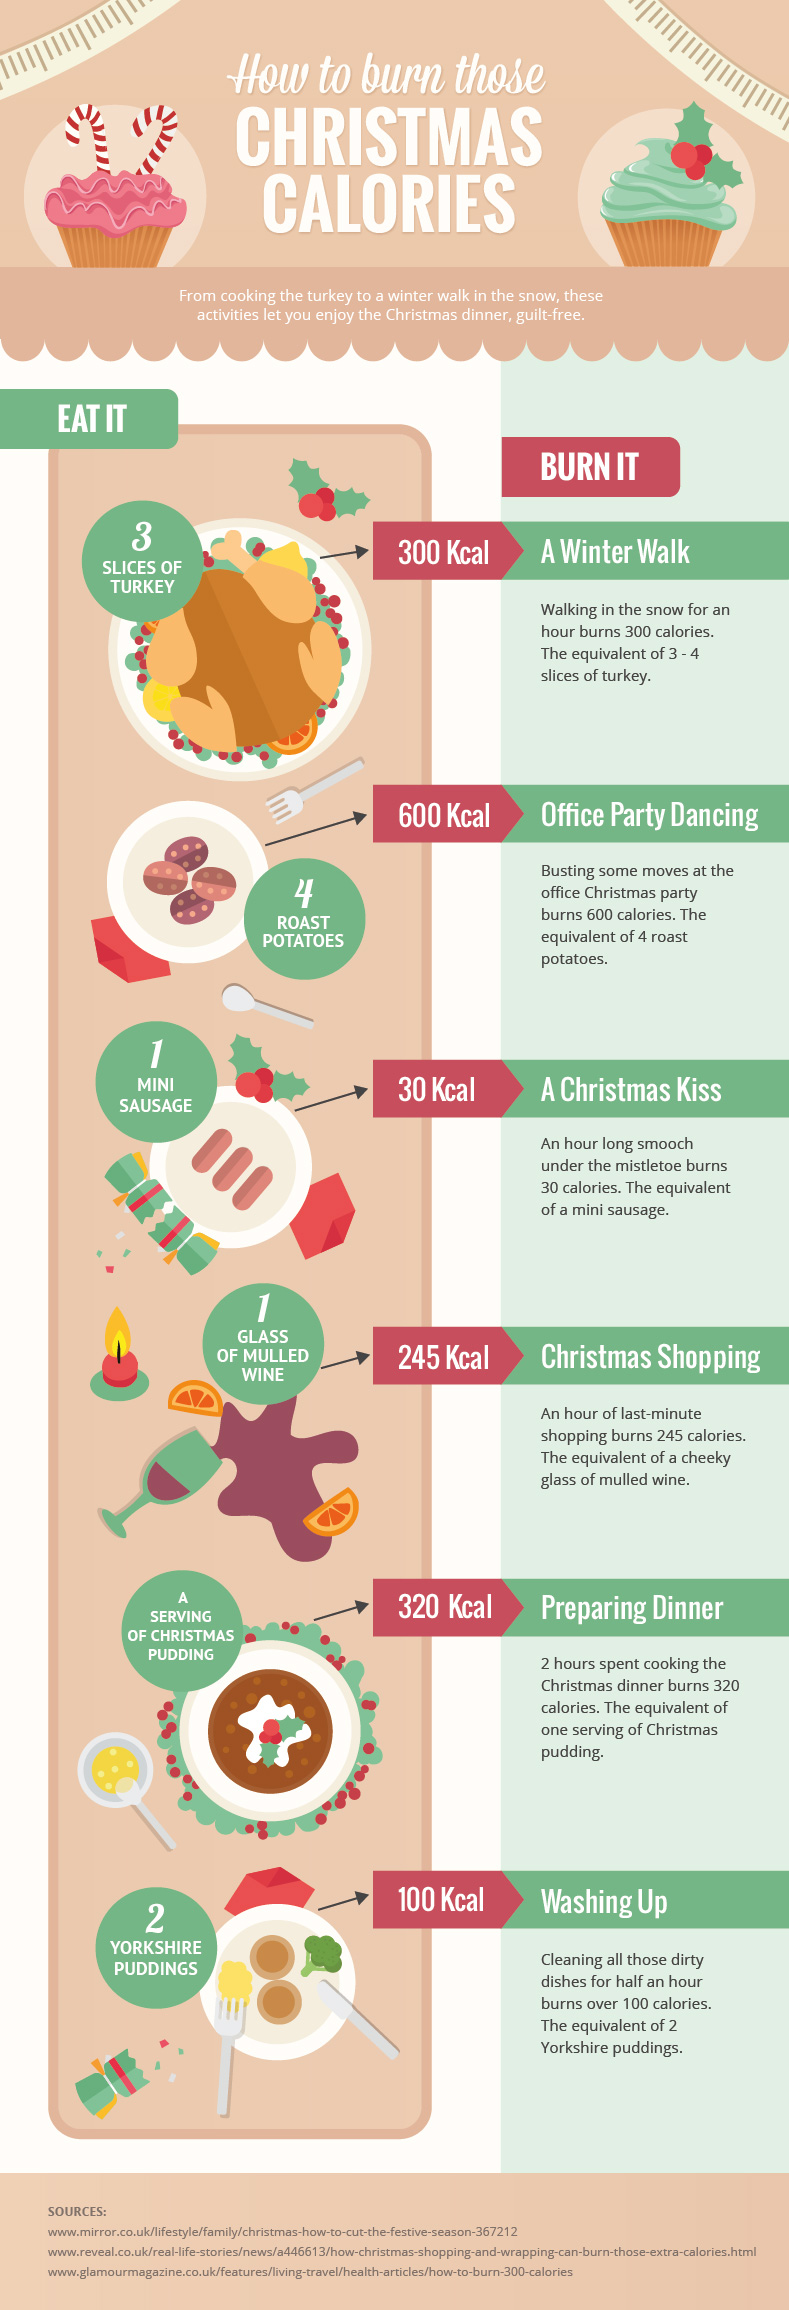 Trying To Burn Off Those Christmas Calories? Here’s How To Do It Infographic